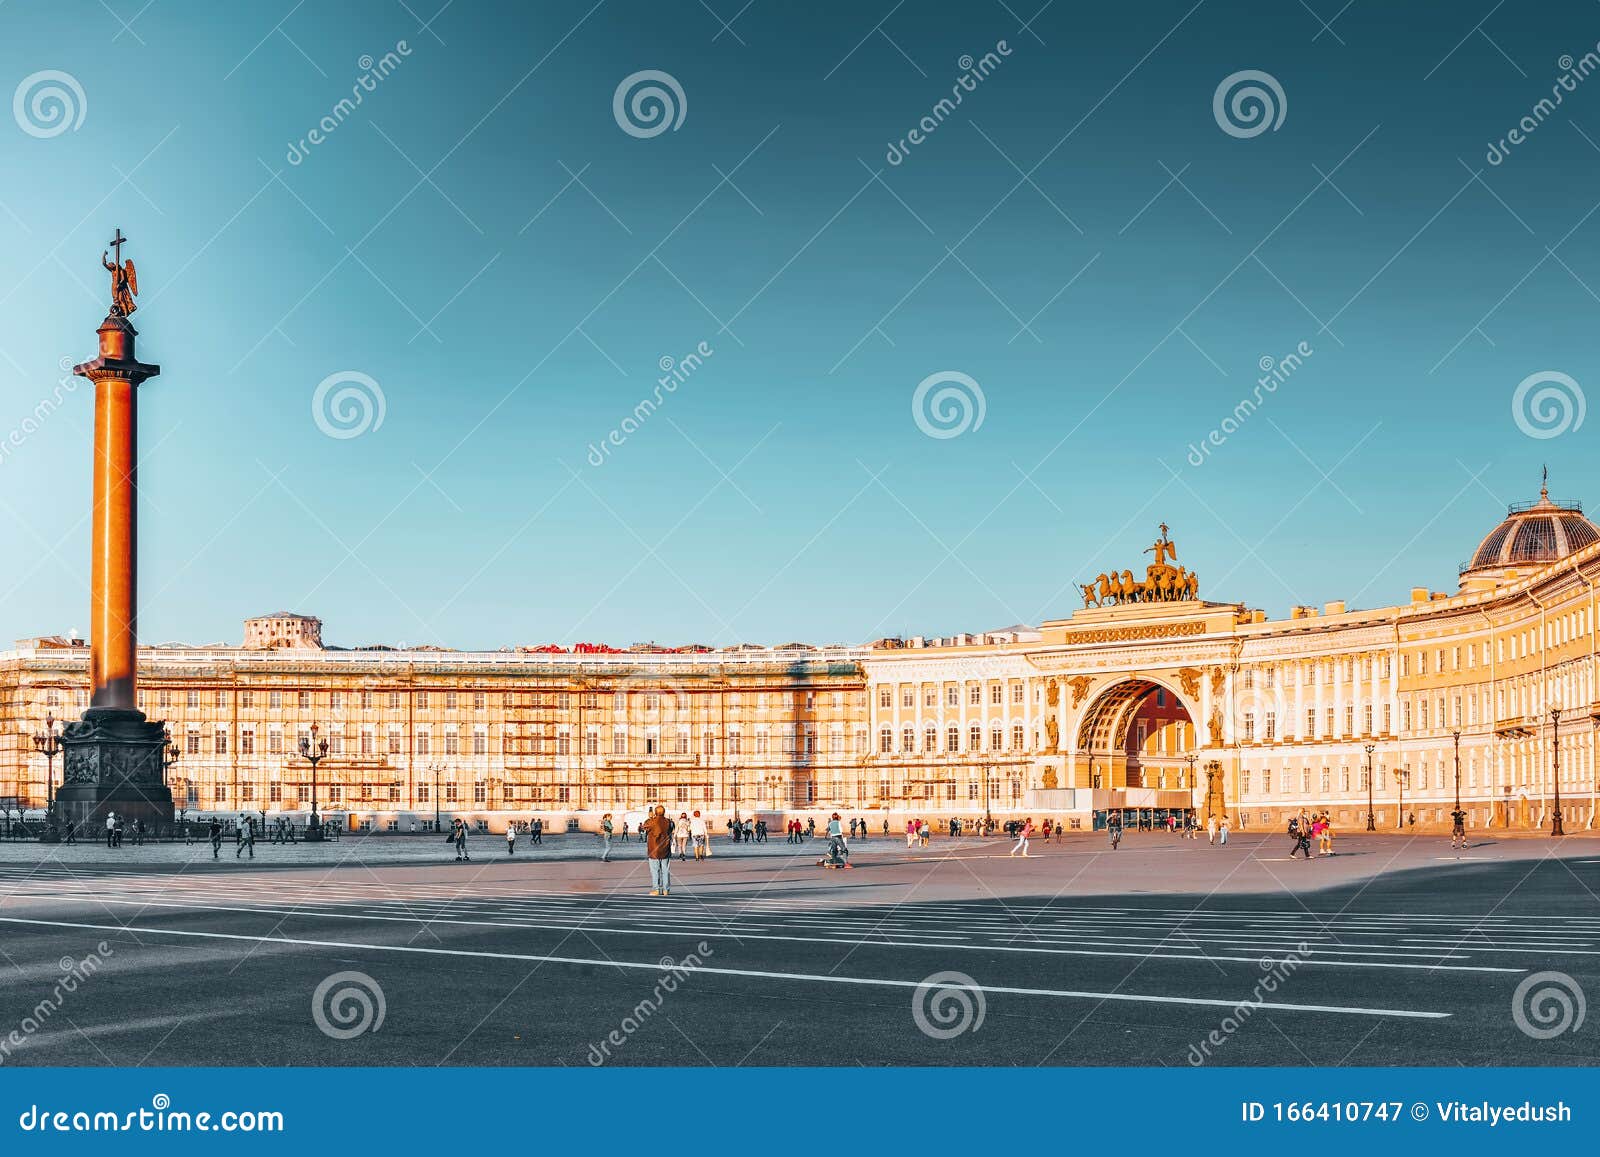 Alexander Column On Palace Square In St. Petersburg Stock